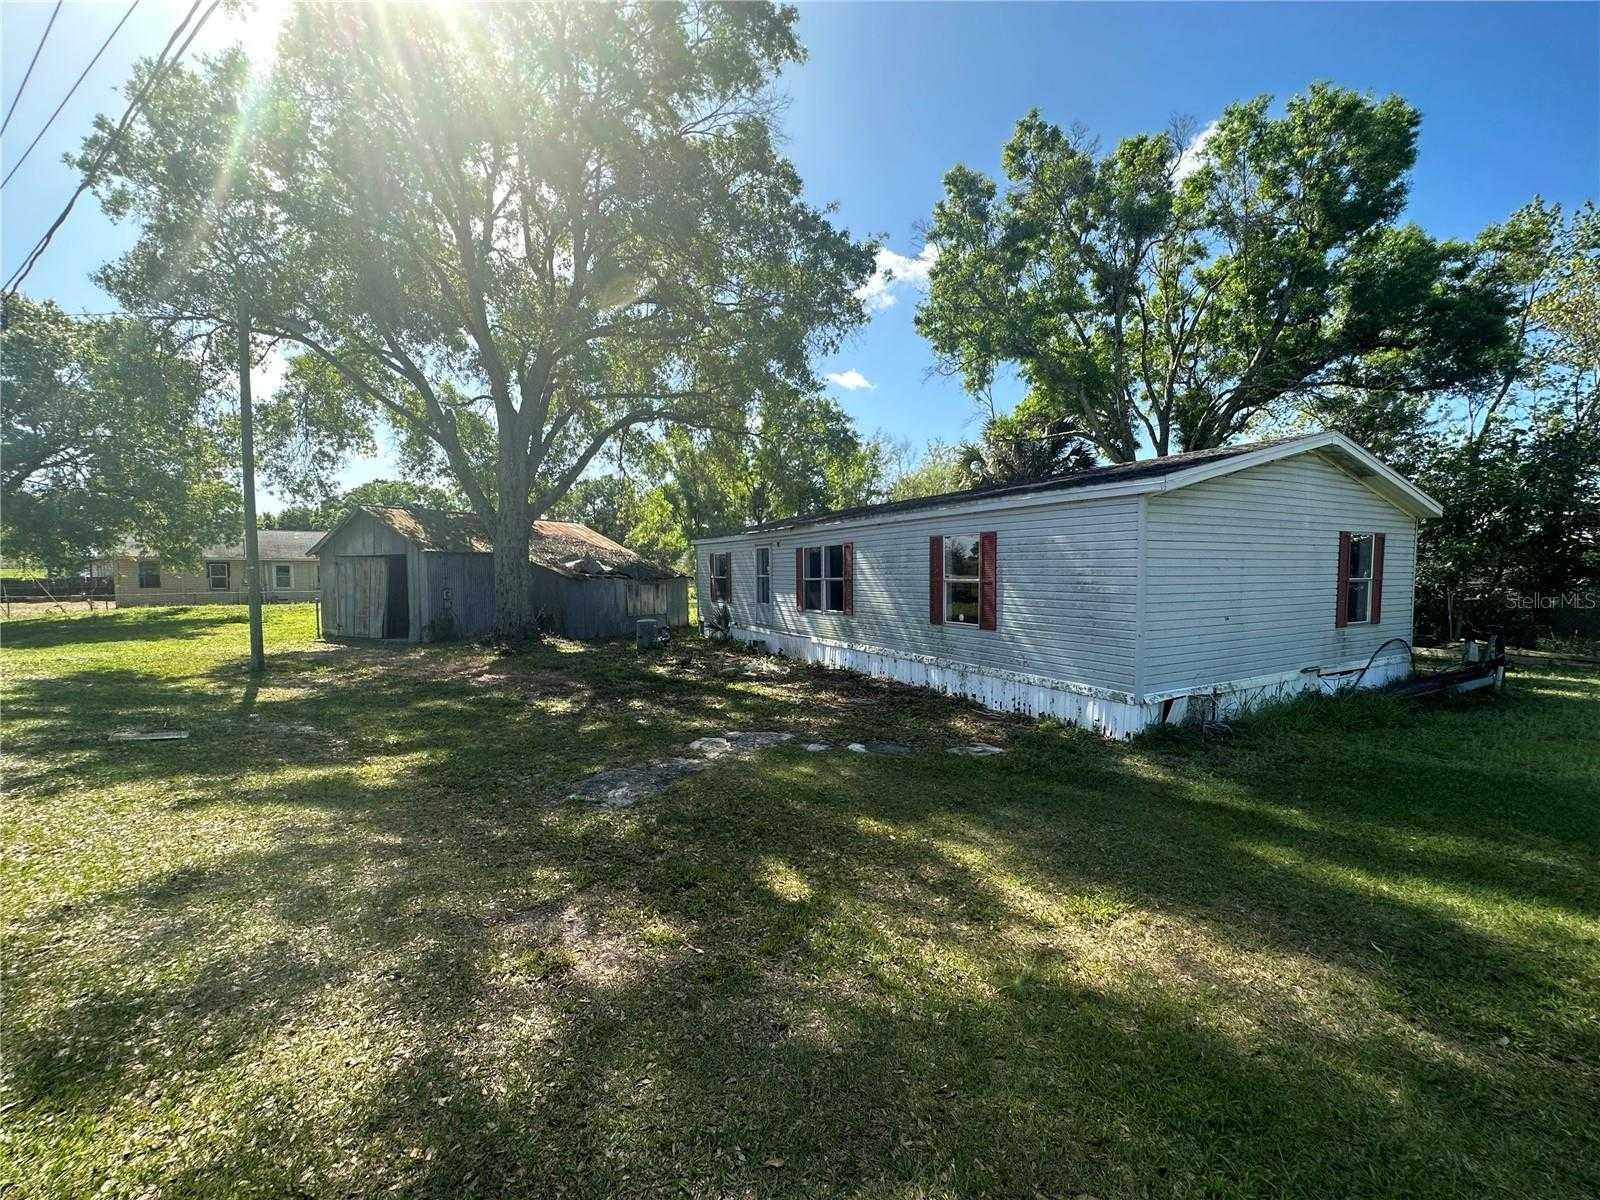 118 CROTON, WINTER HAVEN, Manufactured Home - Post 1977,  for sale, Crosby and Associates Inc